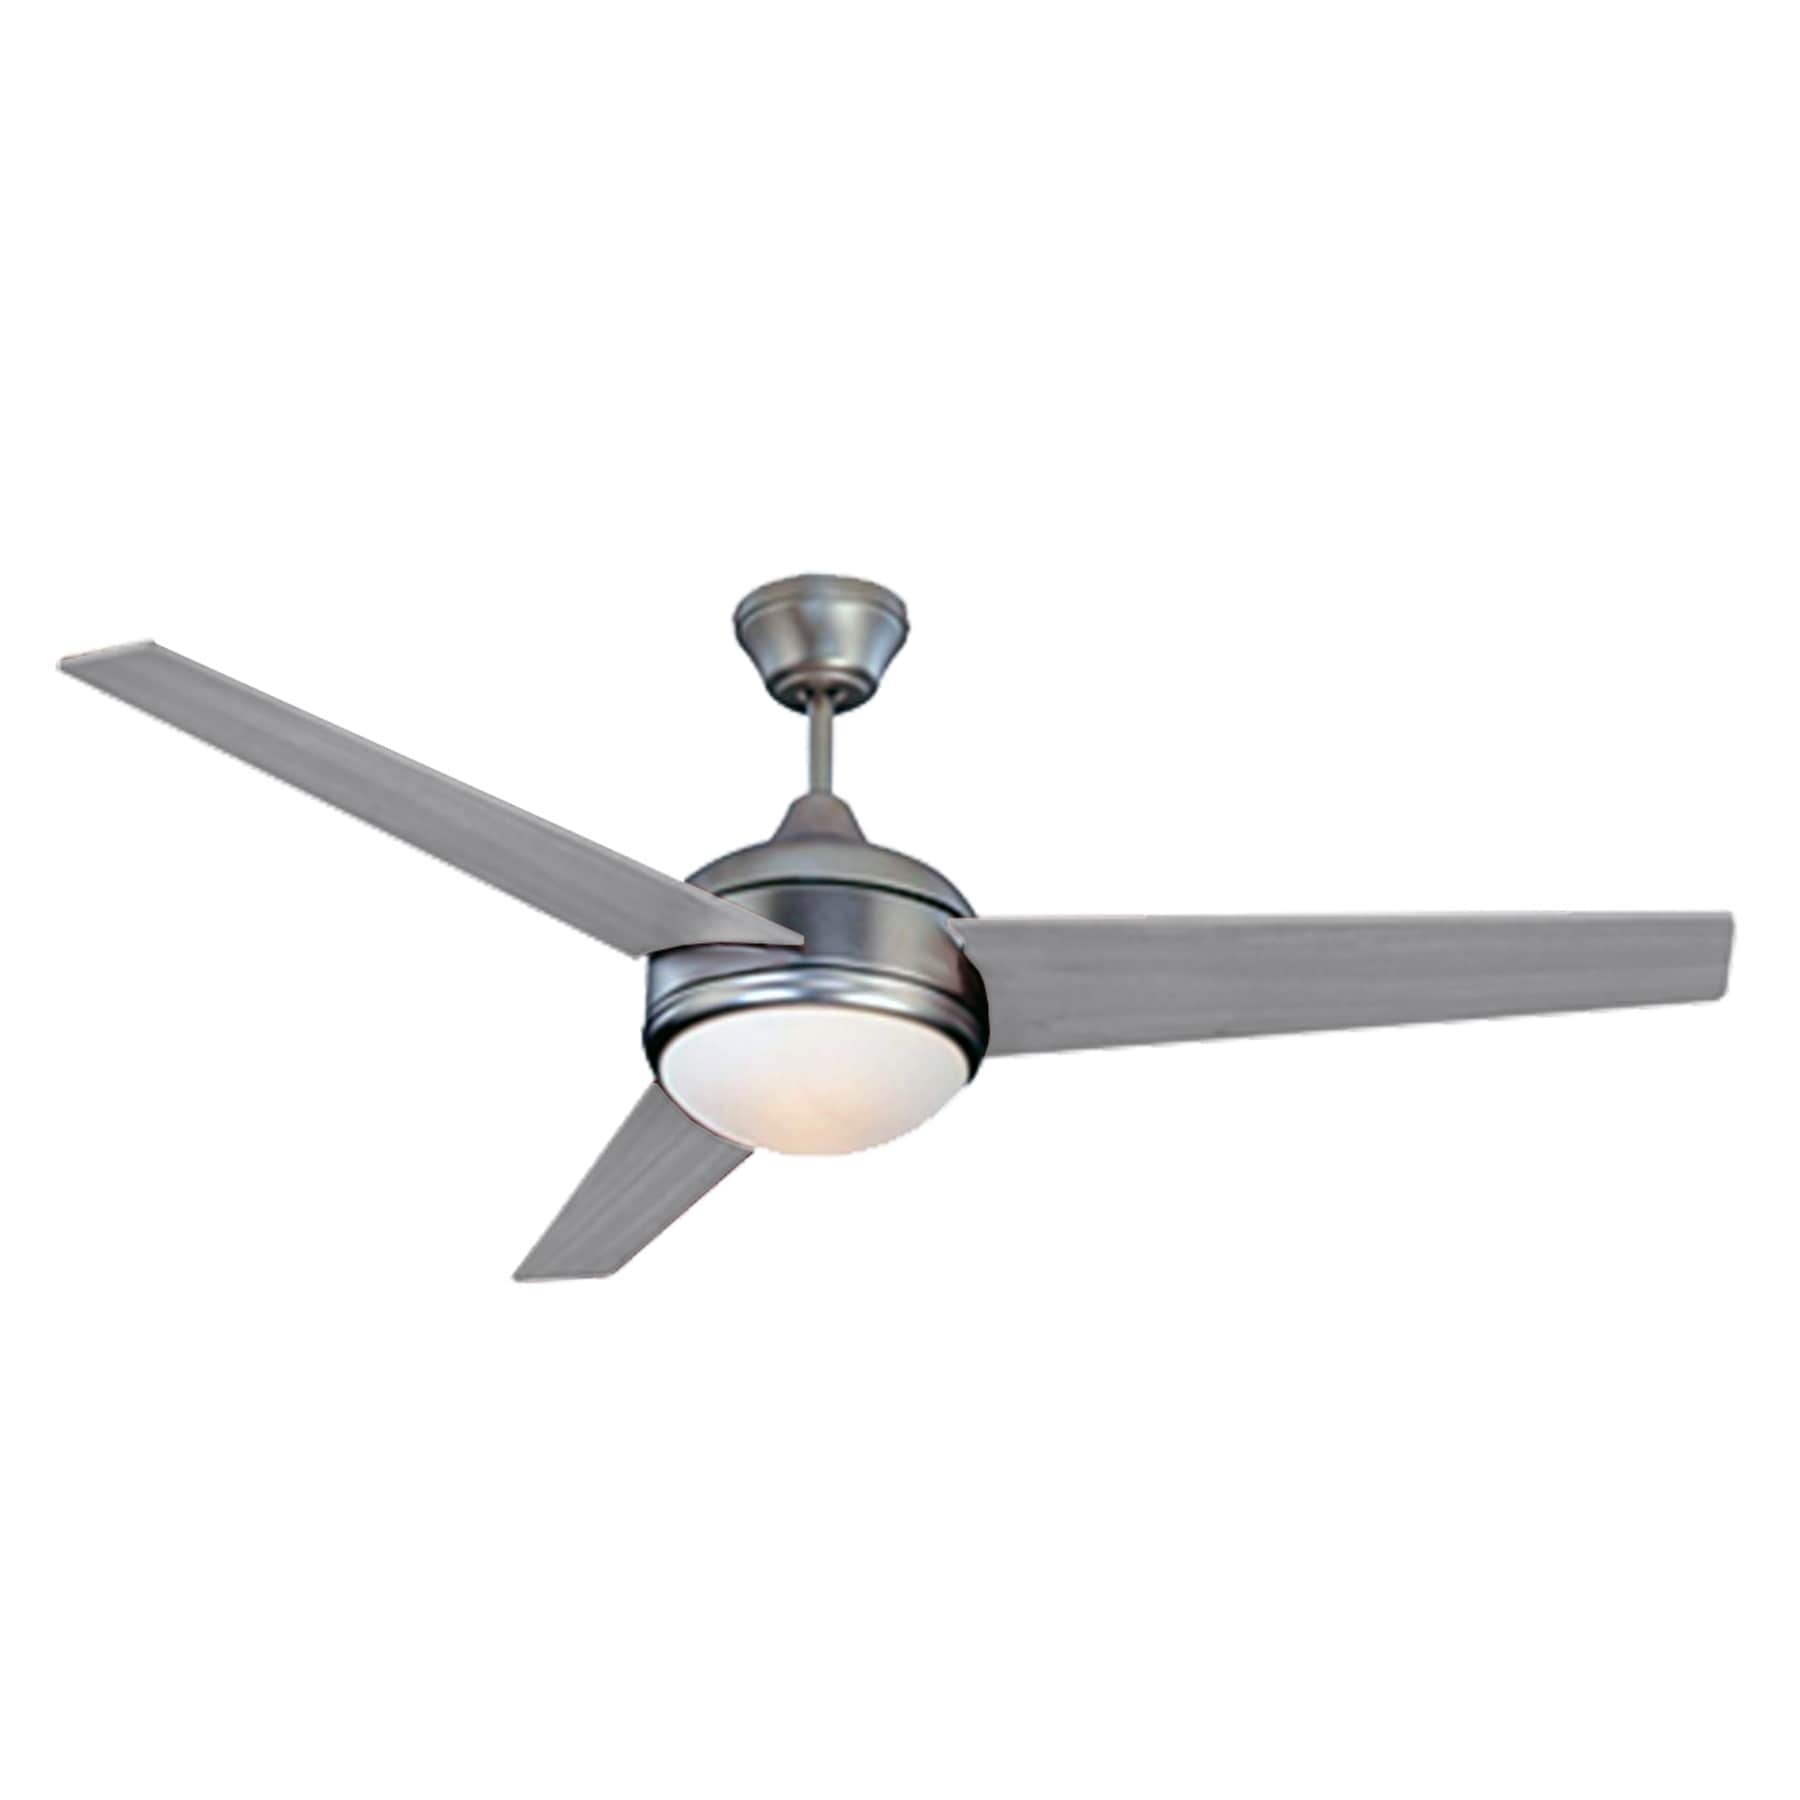 Shop Homeselects 2060 Contempo 52 Ceiling Fan With Pull Chain